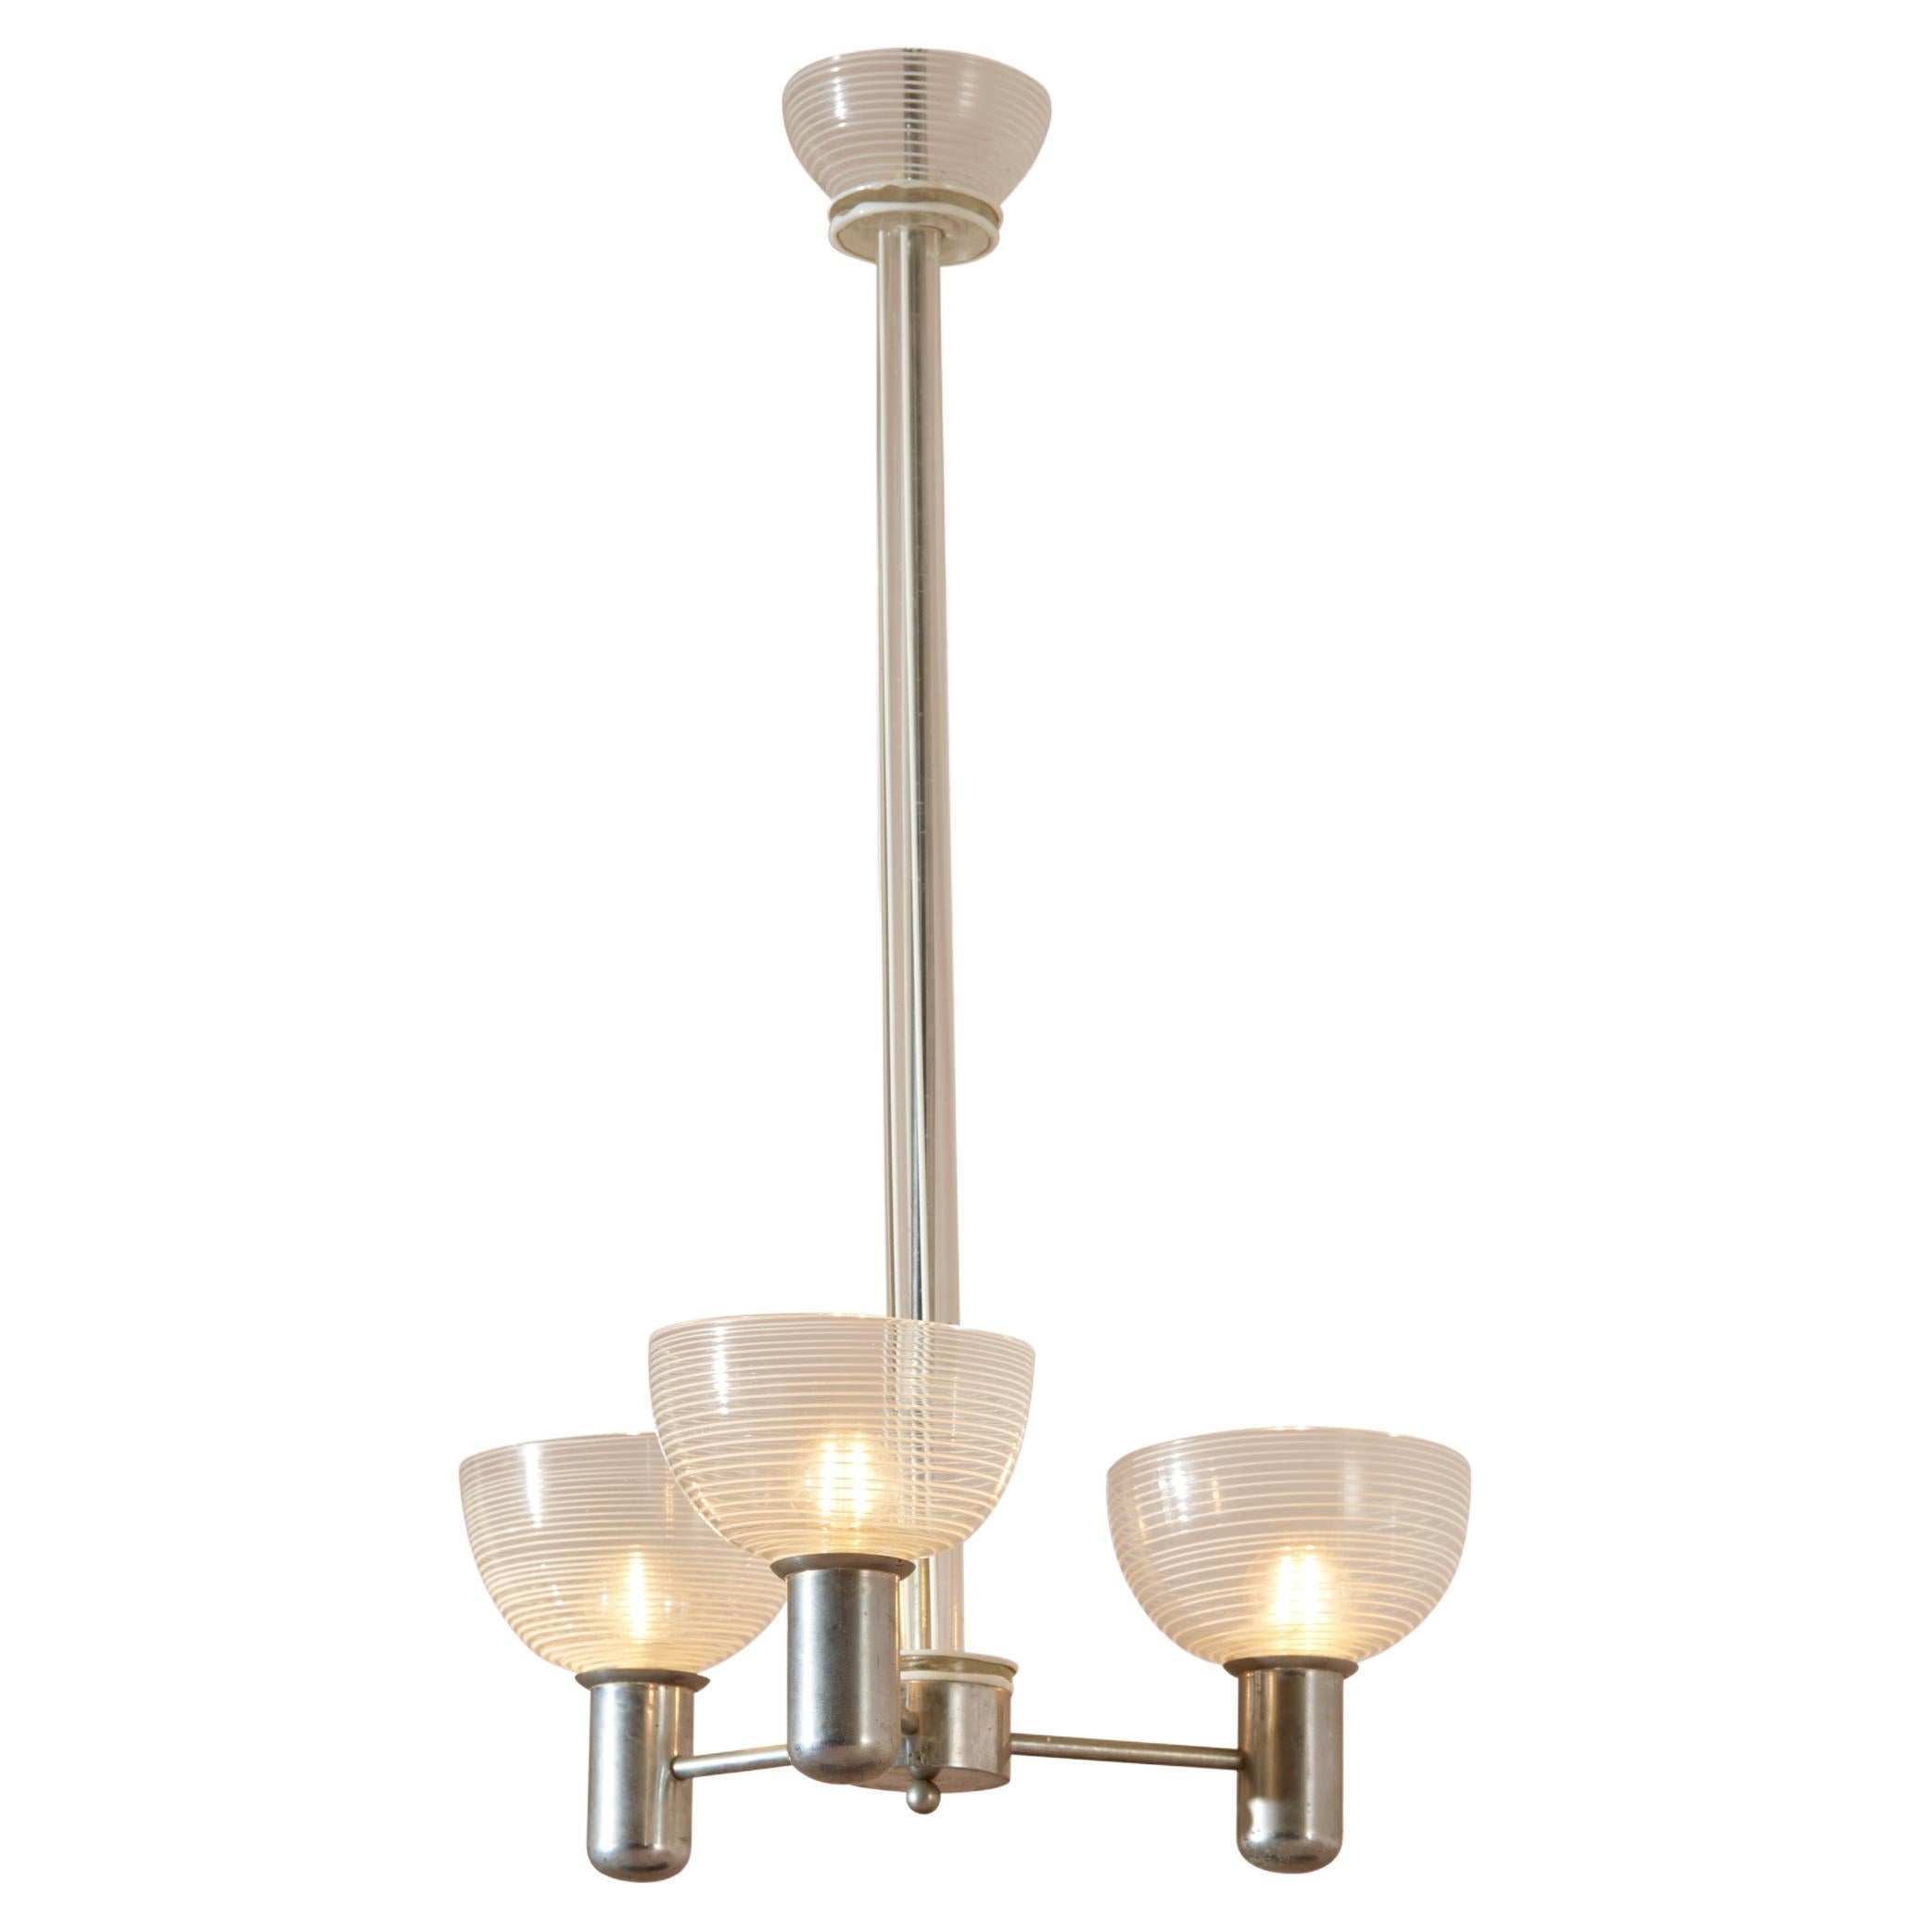 Murano Rationalist Chandelier with Filigrana and Lattimo Glass, Italy, 1930s For Sale